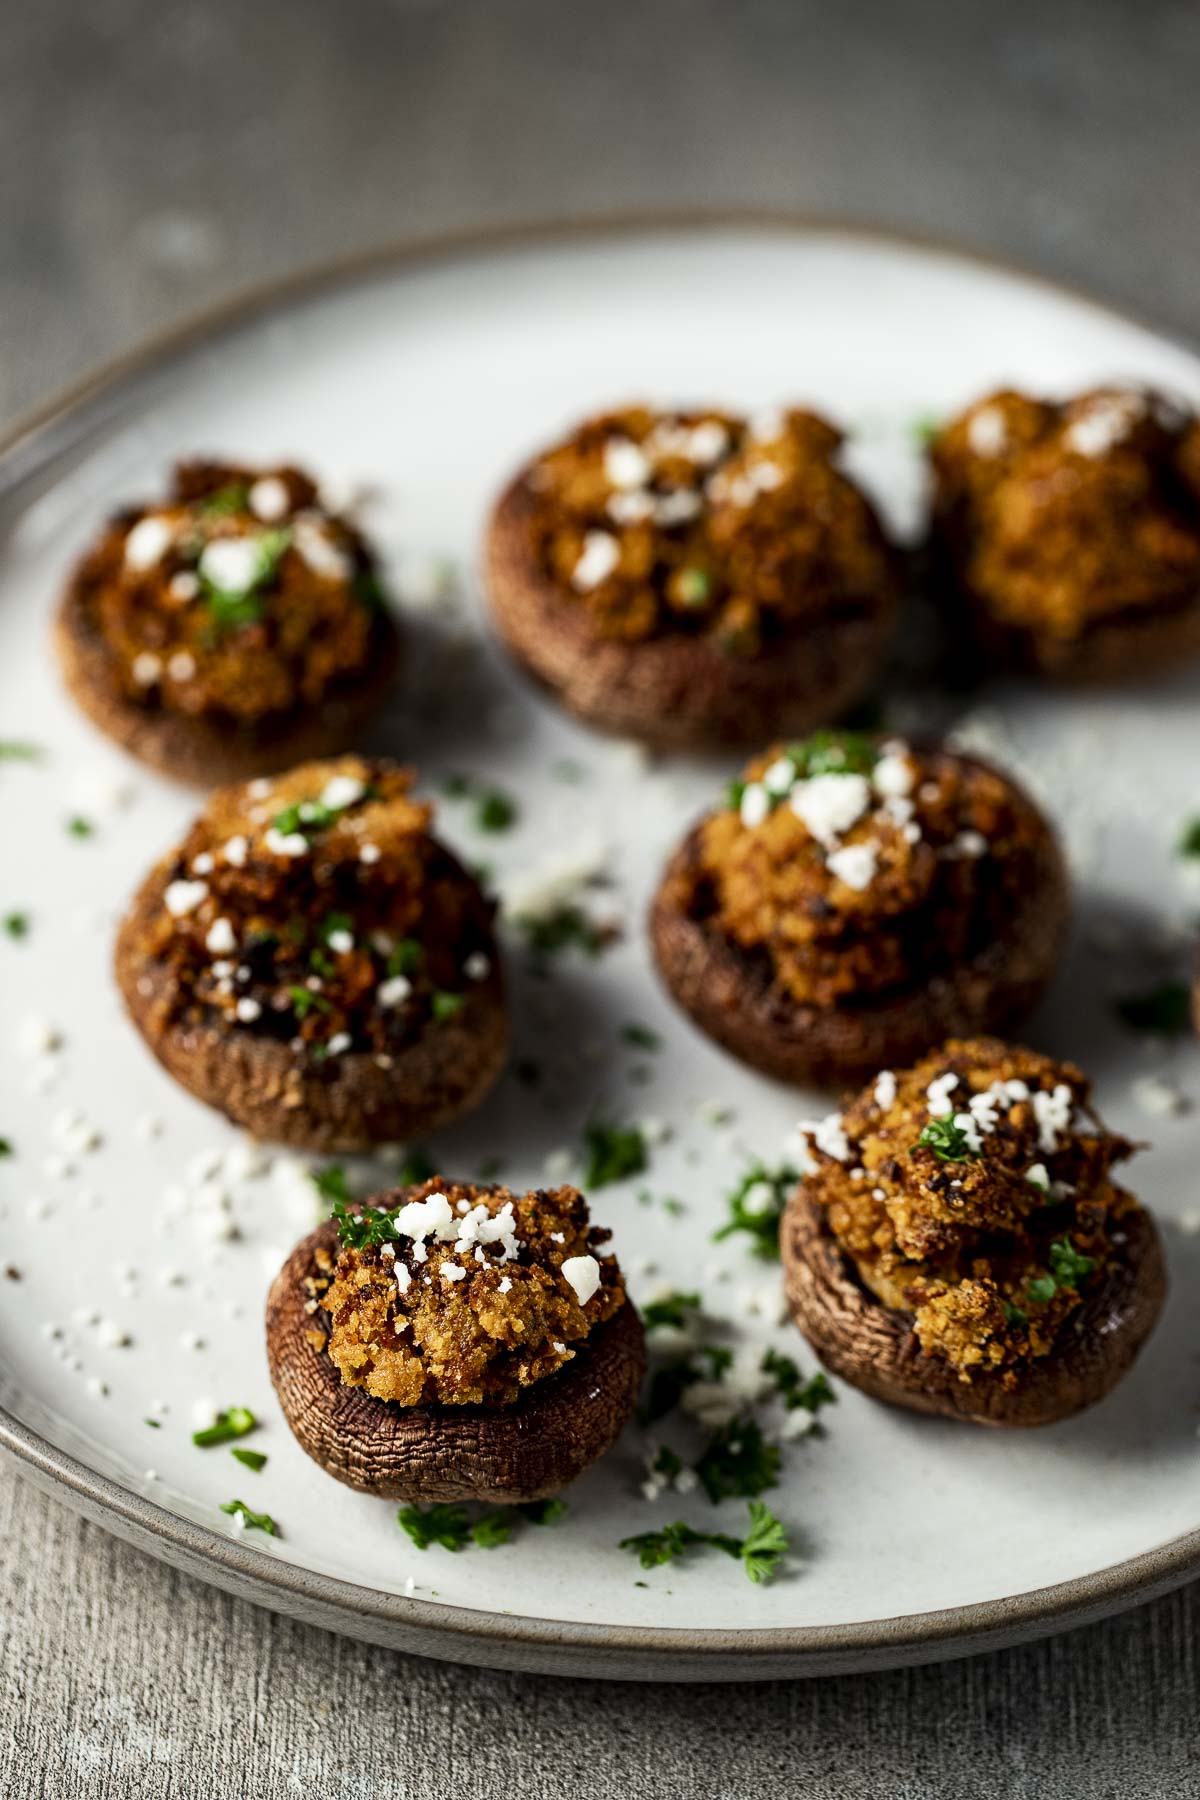 Stuffed mushrooms arranged on a white plate and topped with cilantro and cotija cheese.